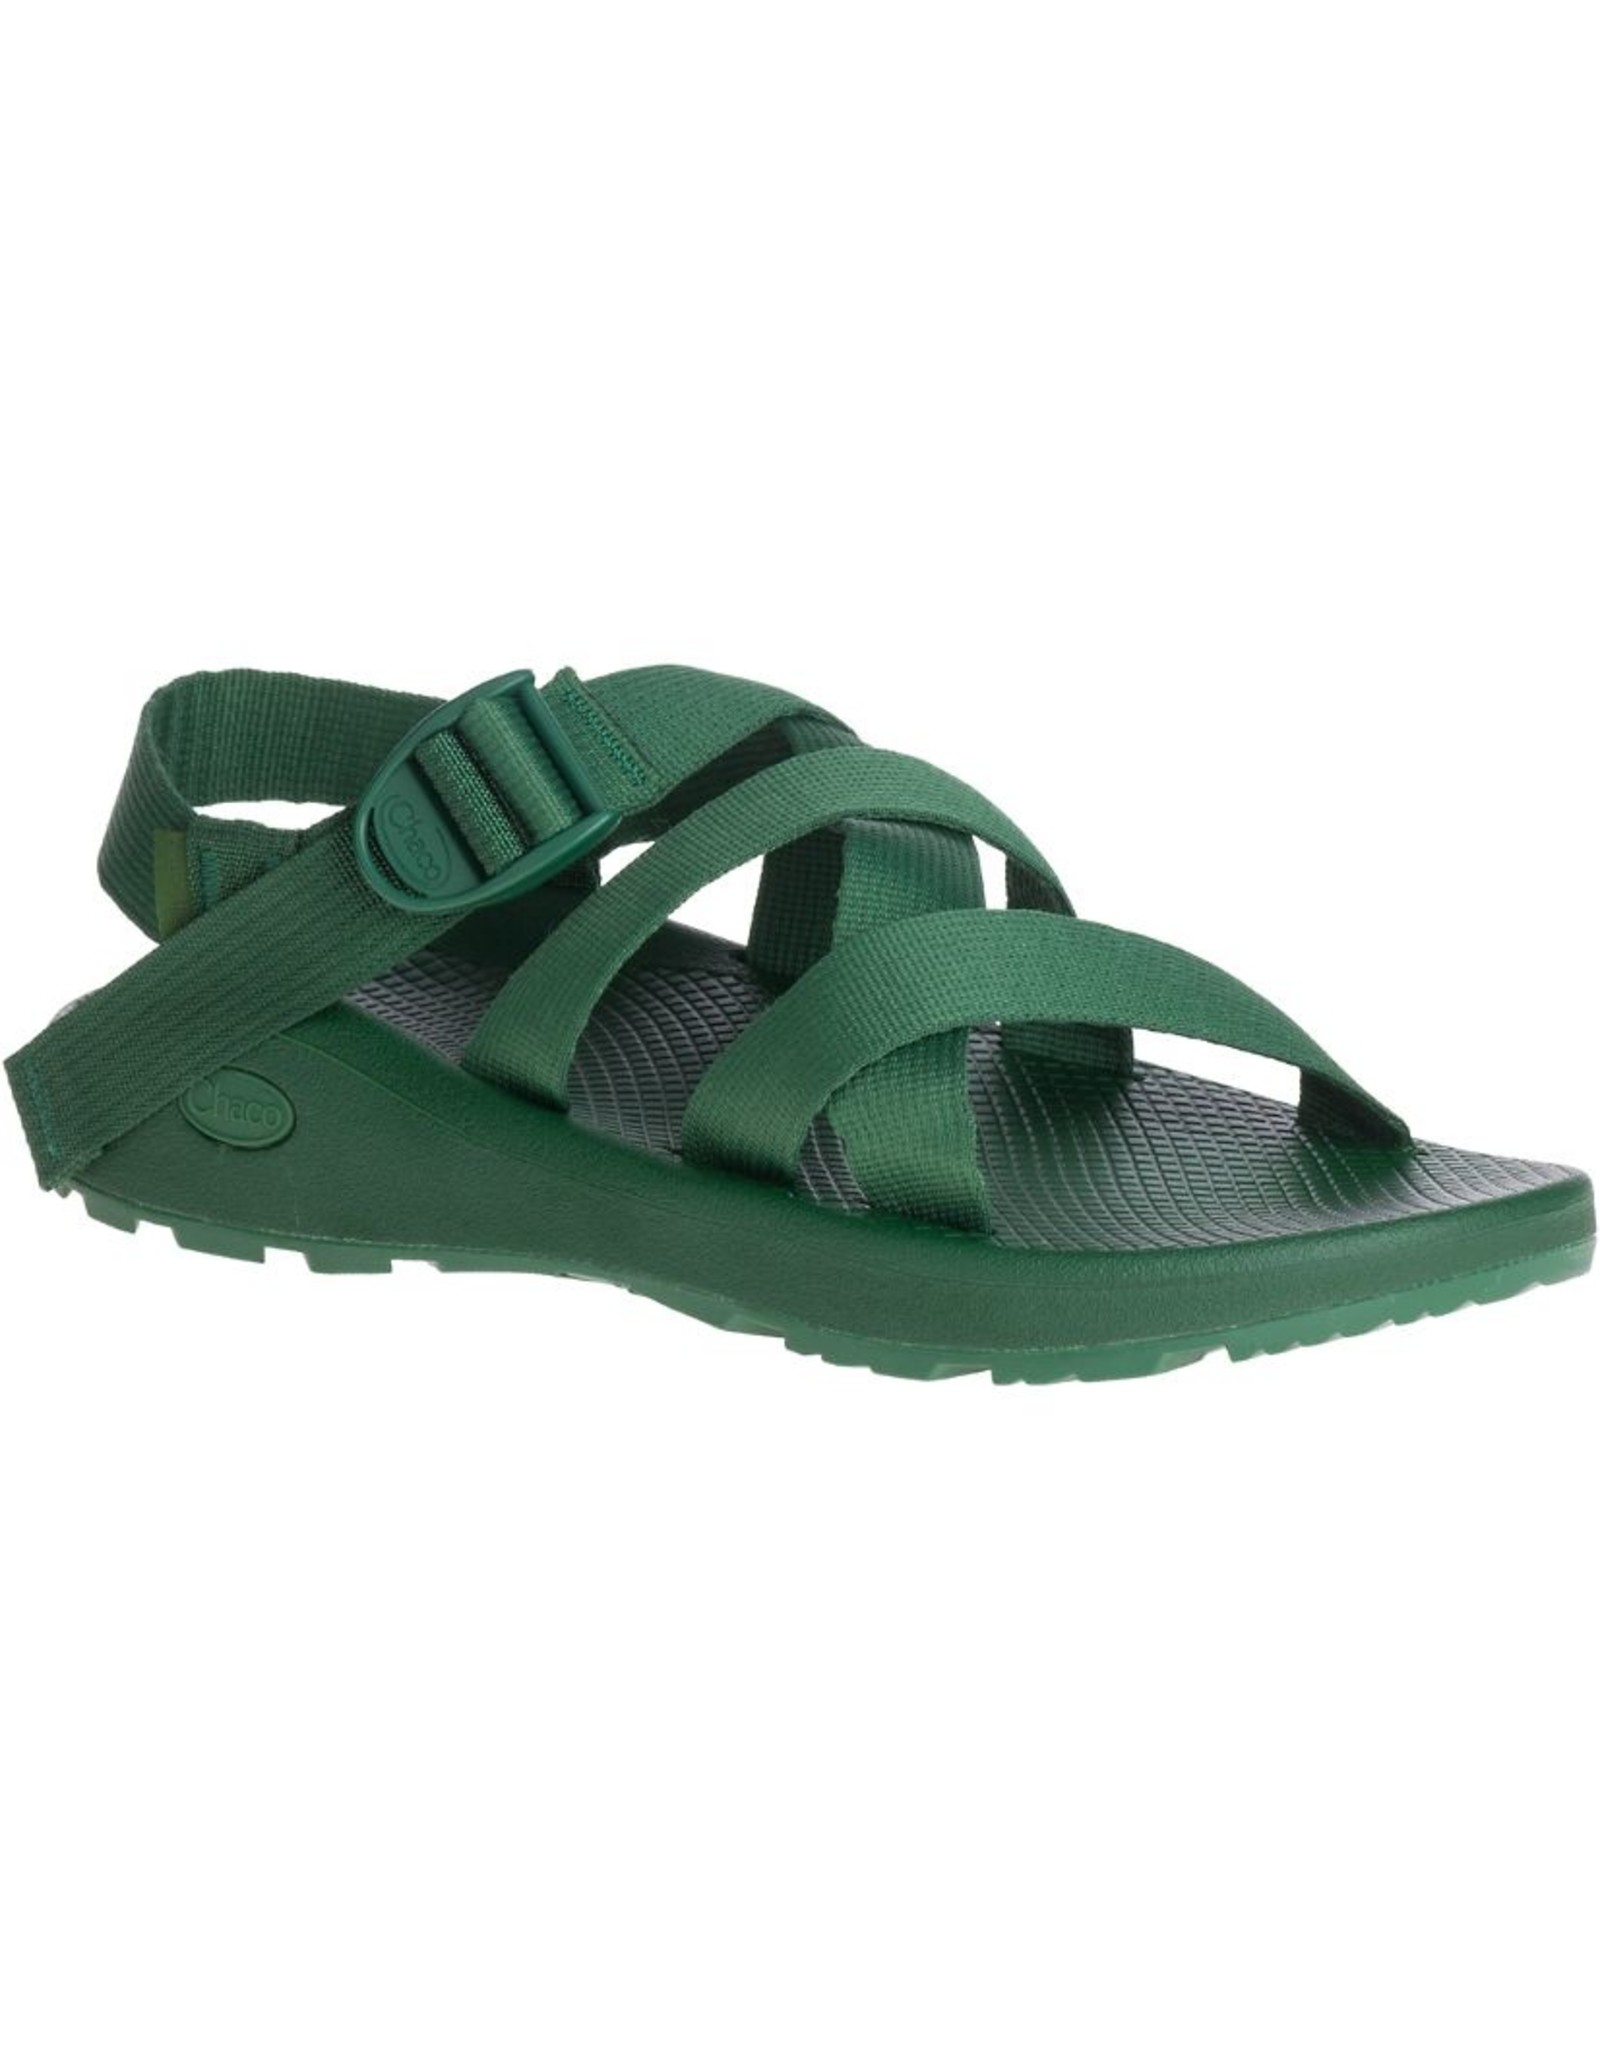 CHACO MEN'S BANDED Z CLOUD-PASTURES